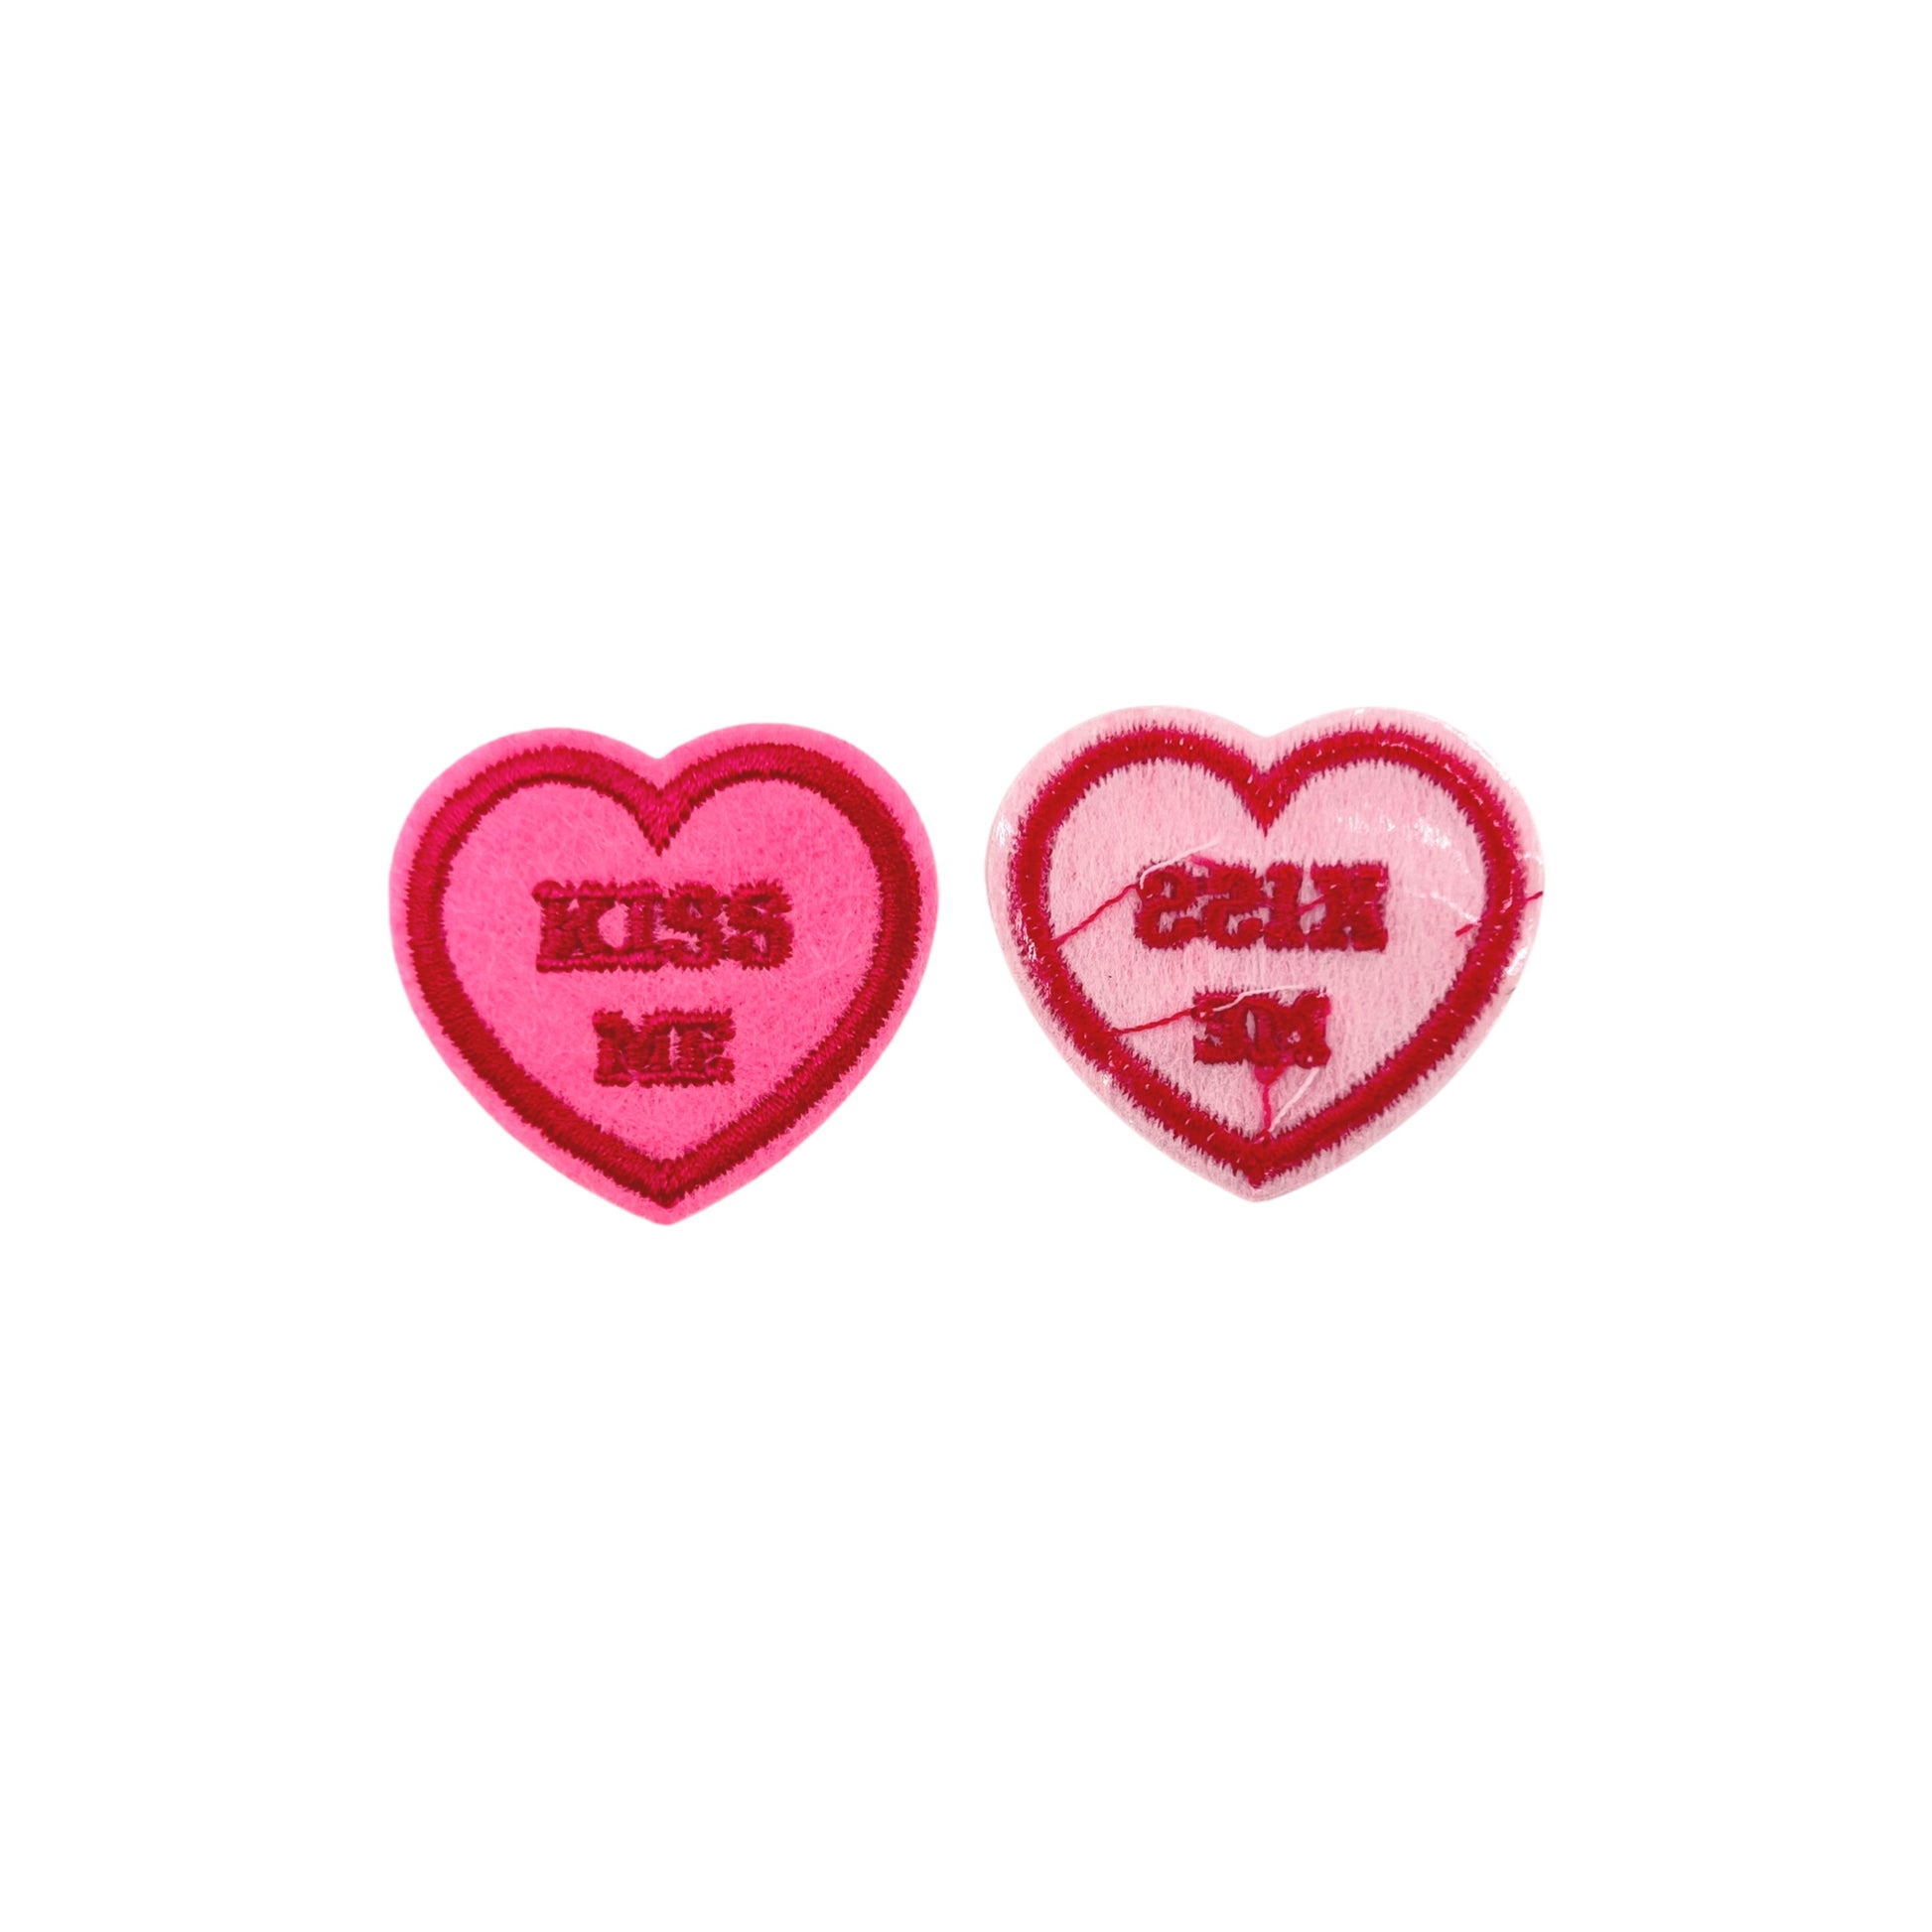 MISDONR 3pcs Pink Heart Embroidered Iron on Patches for Clothing Jackets Backpacks 2.7x2.8 inch